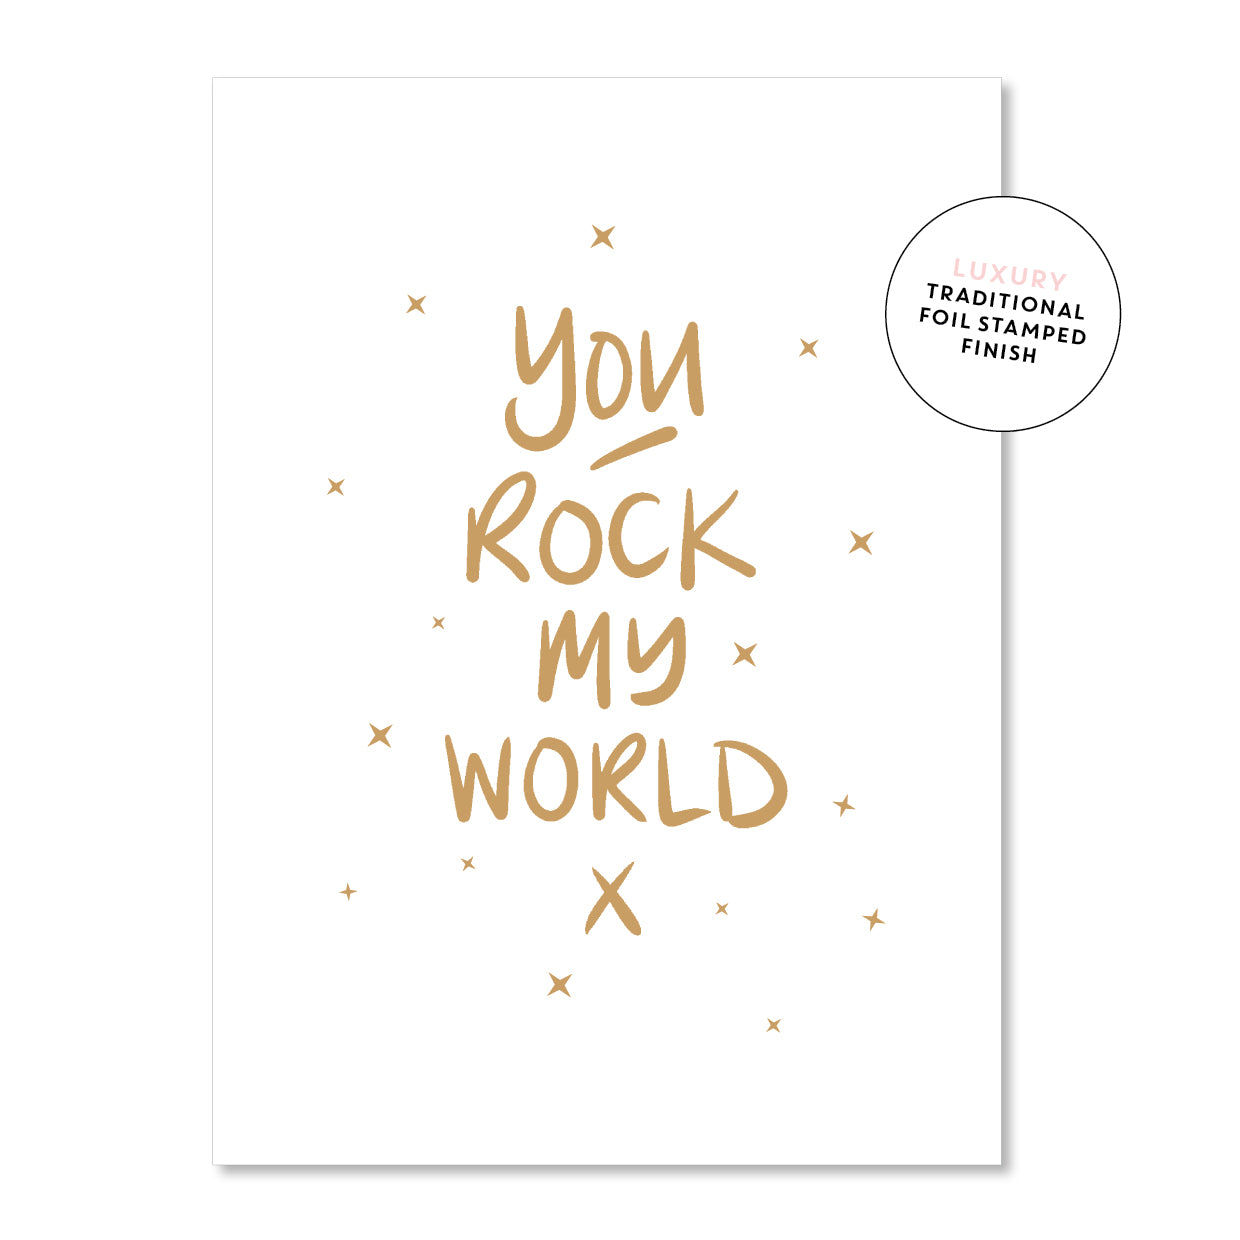 YOU ROCK MY WORLD!